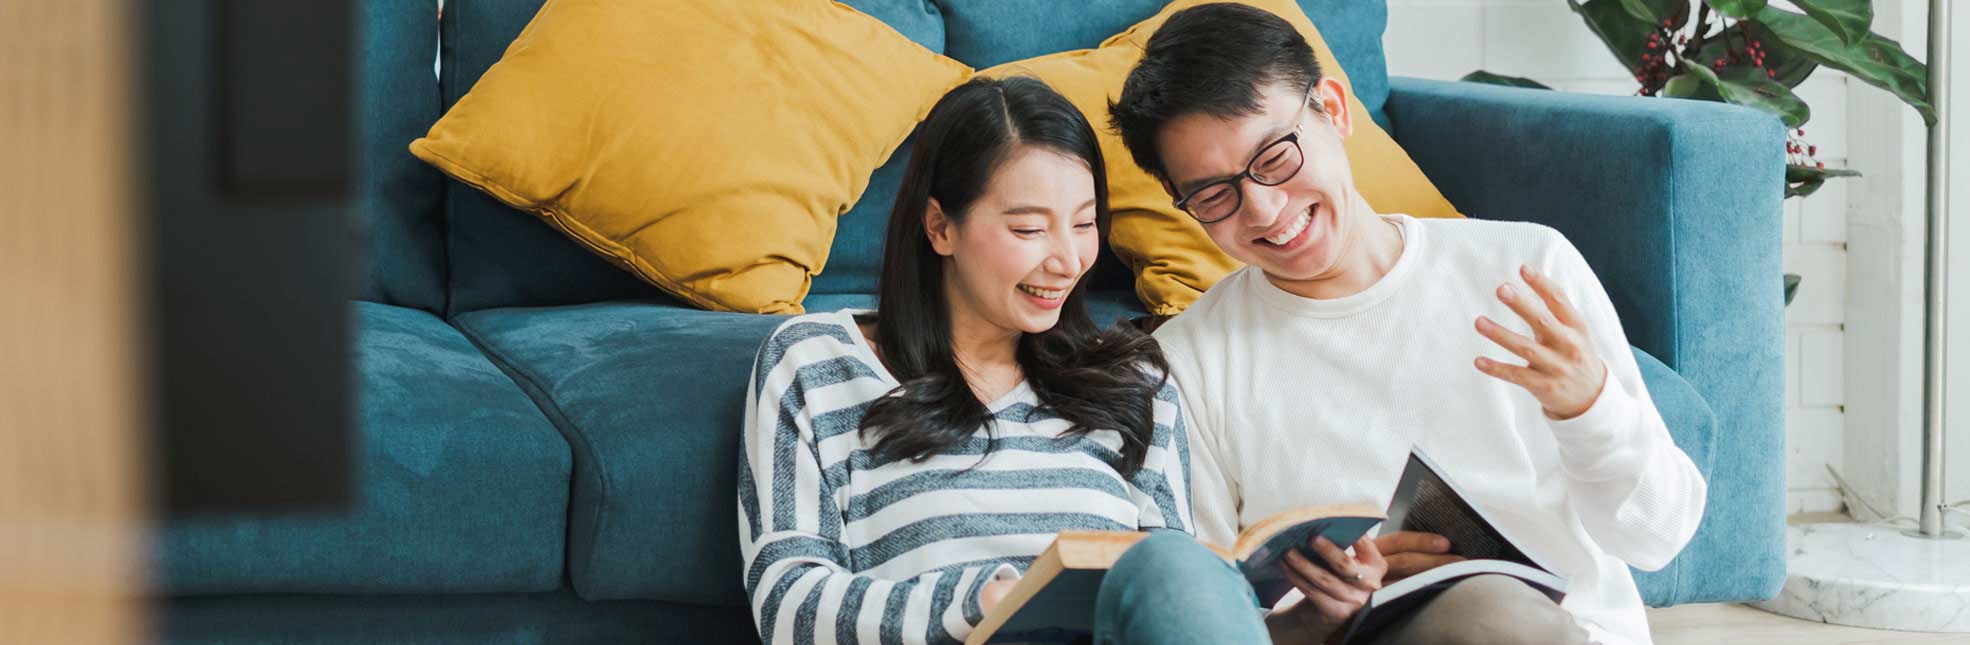 smiling young couple sitting on living room floor together